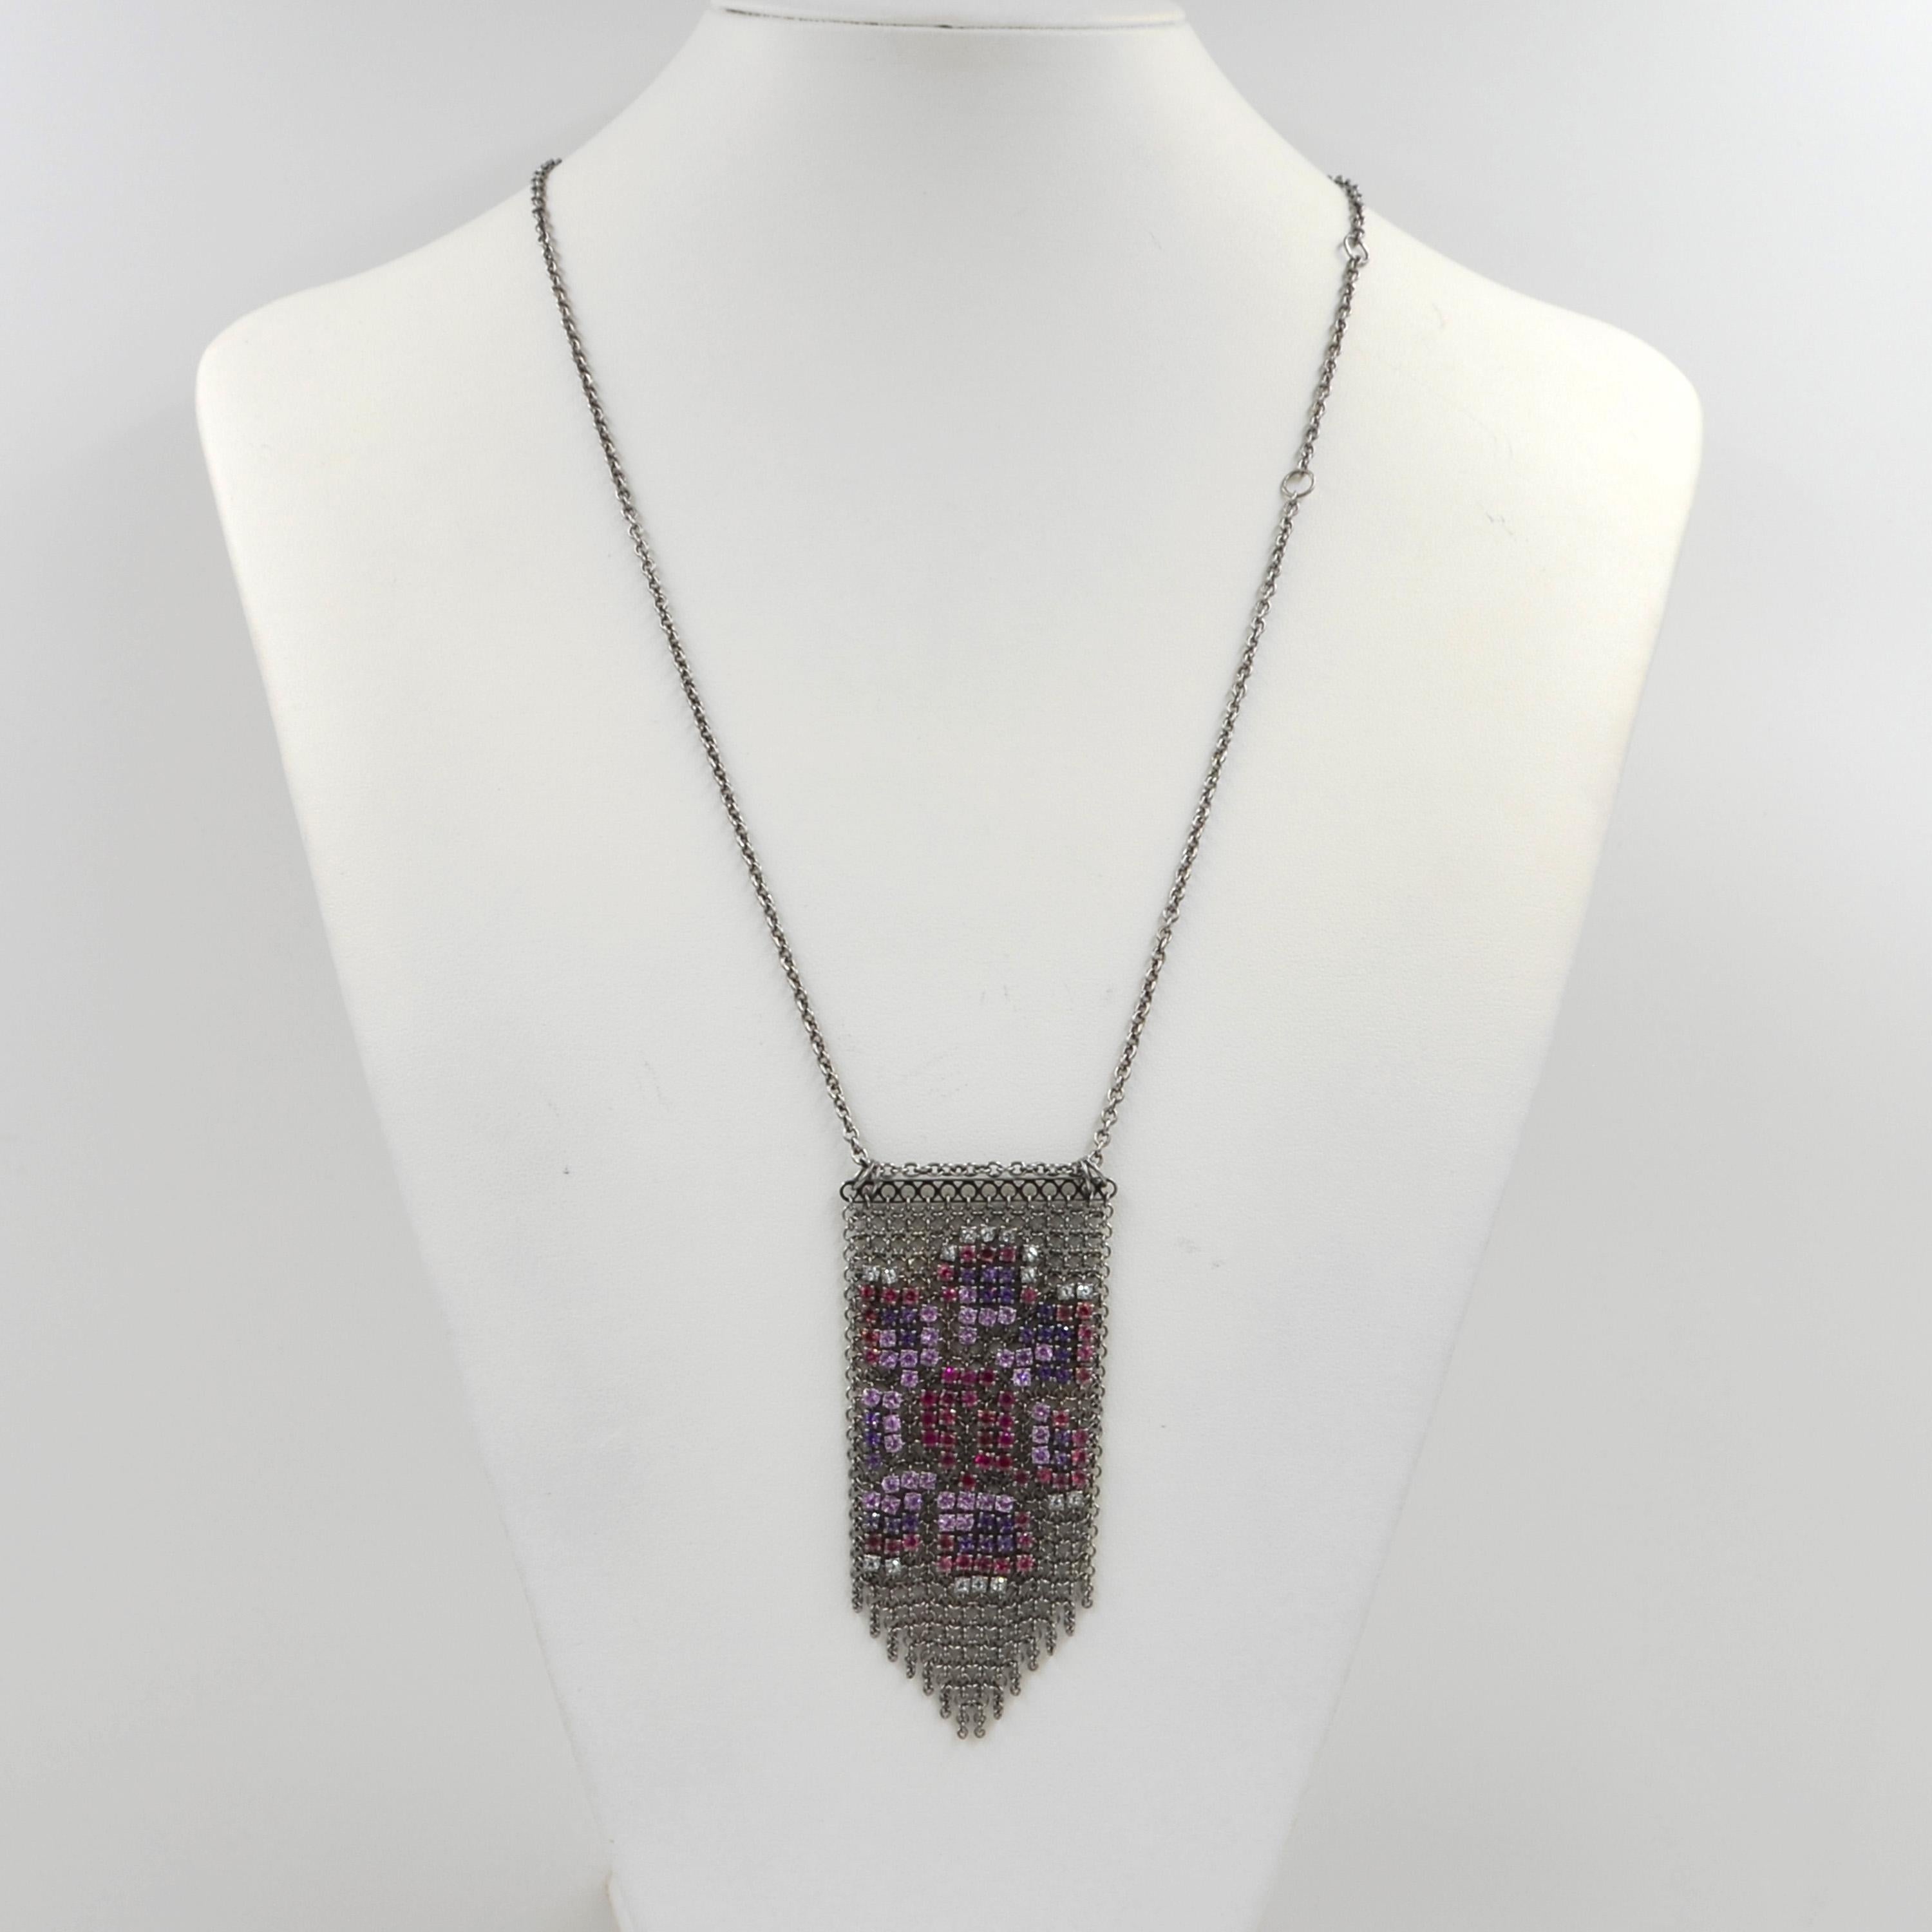 18KT White Gold Multicolor Precious and Semiprecious  Garavelli Soft Pendant Necklace : 
 WHITE TOPAZ, PINK TOURMALINE, PINK SAPPHIRES, AMETHYST AND RUBIES
Pendant size cm 8 x 4
Chain lenght cm 60 with a loop at 55, at 50, at 45 and at 40 cm
18 KT